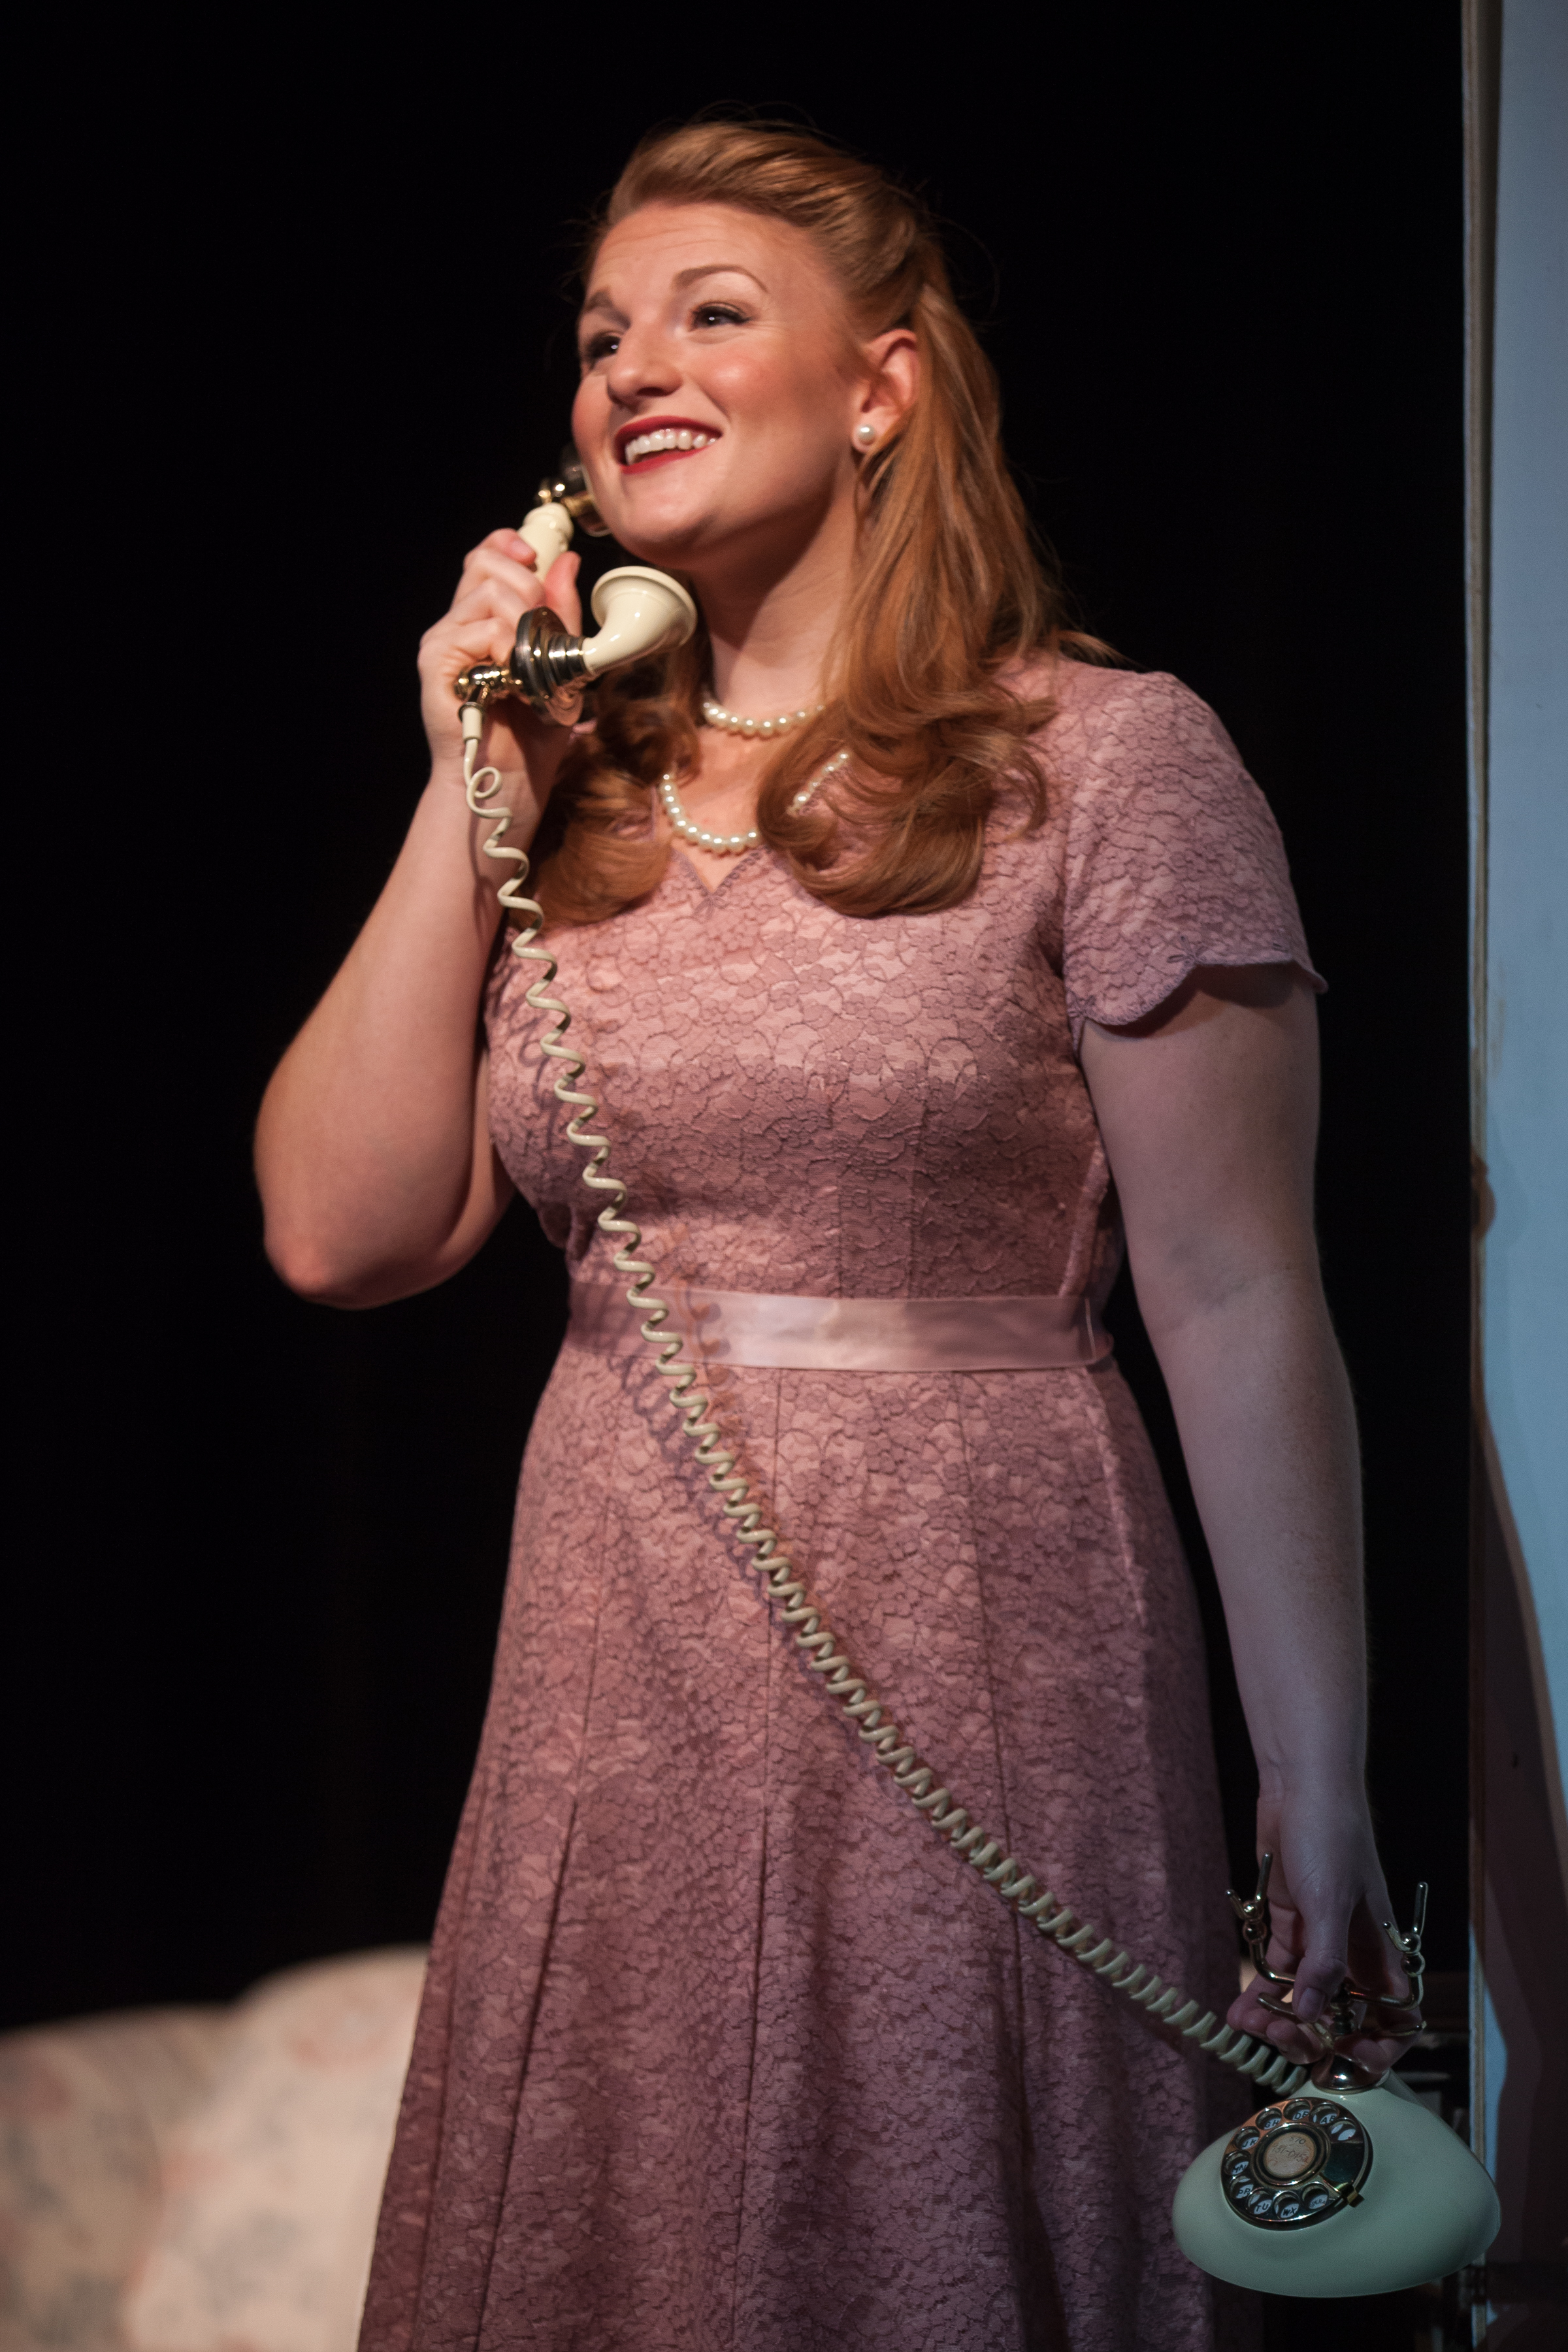  Lucy in  The Telephone.&nbsp; Photo cred: Kelly Hicks 